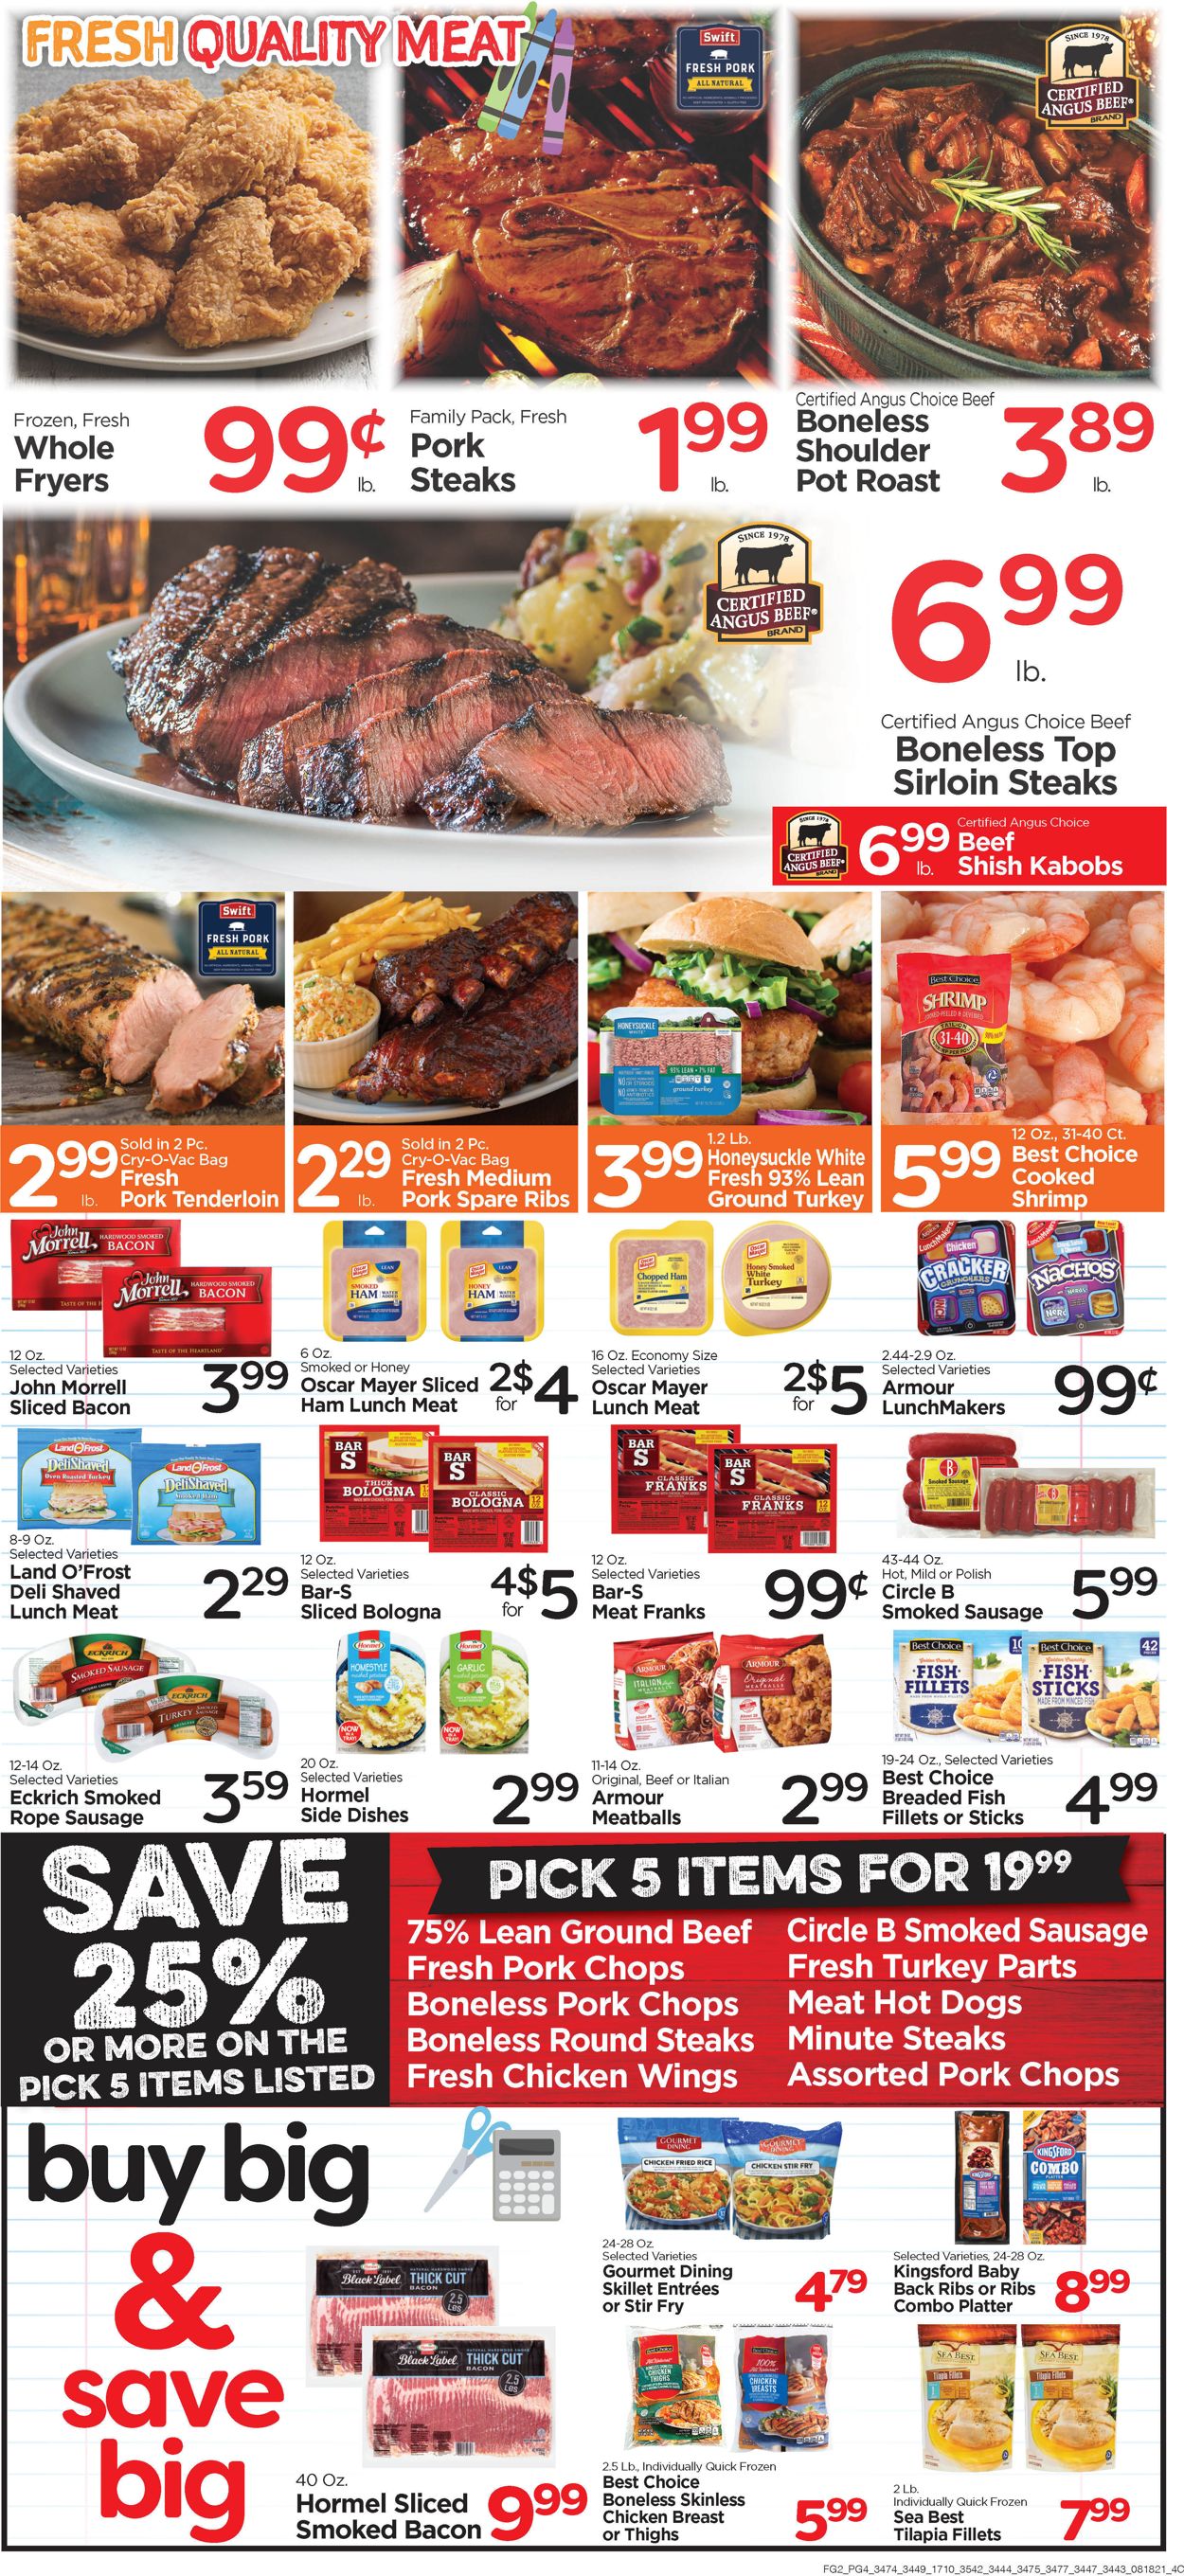 Edwards Food Giant Ad from 08/18/2021